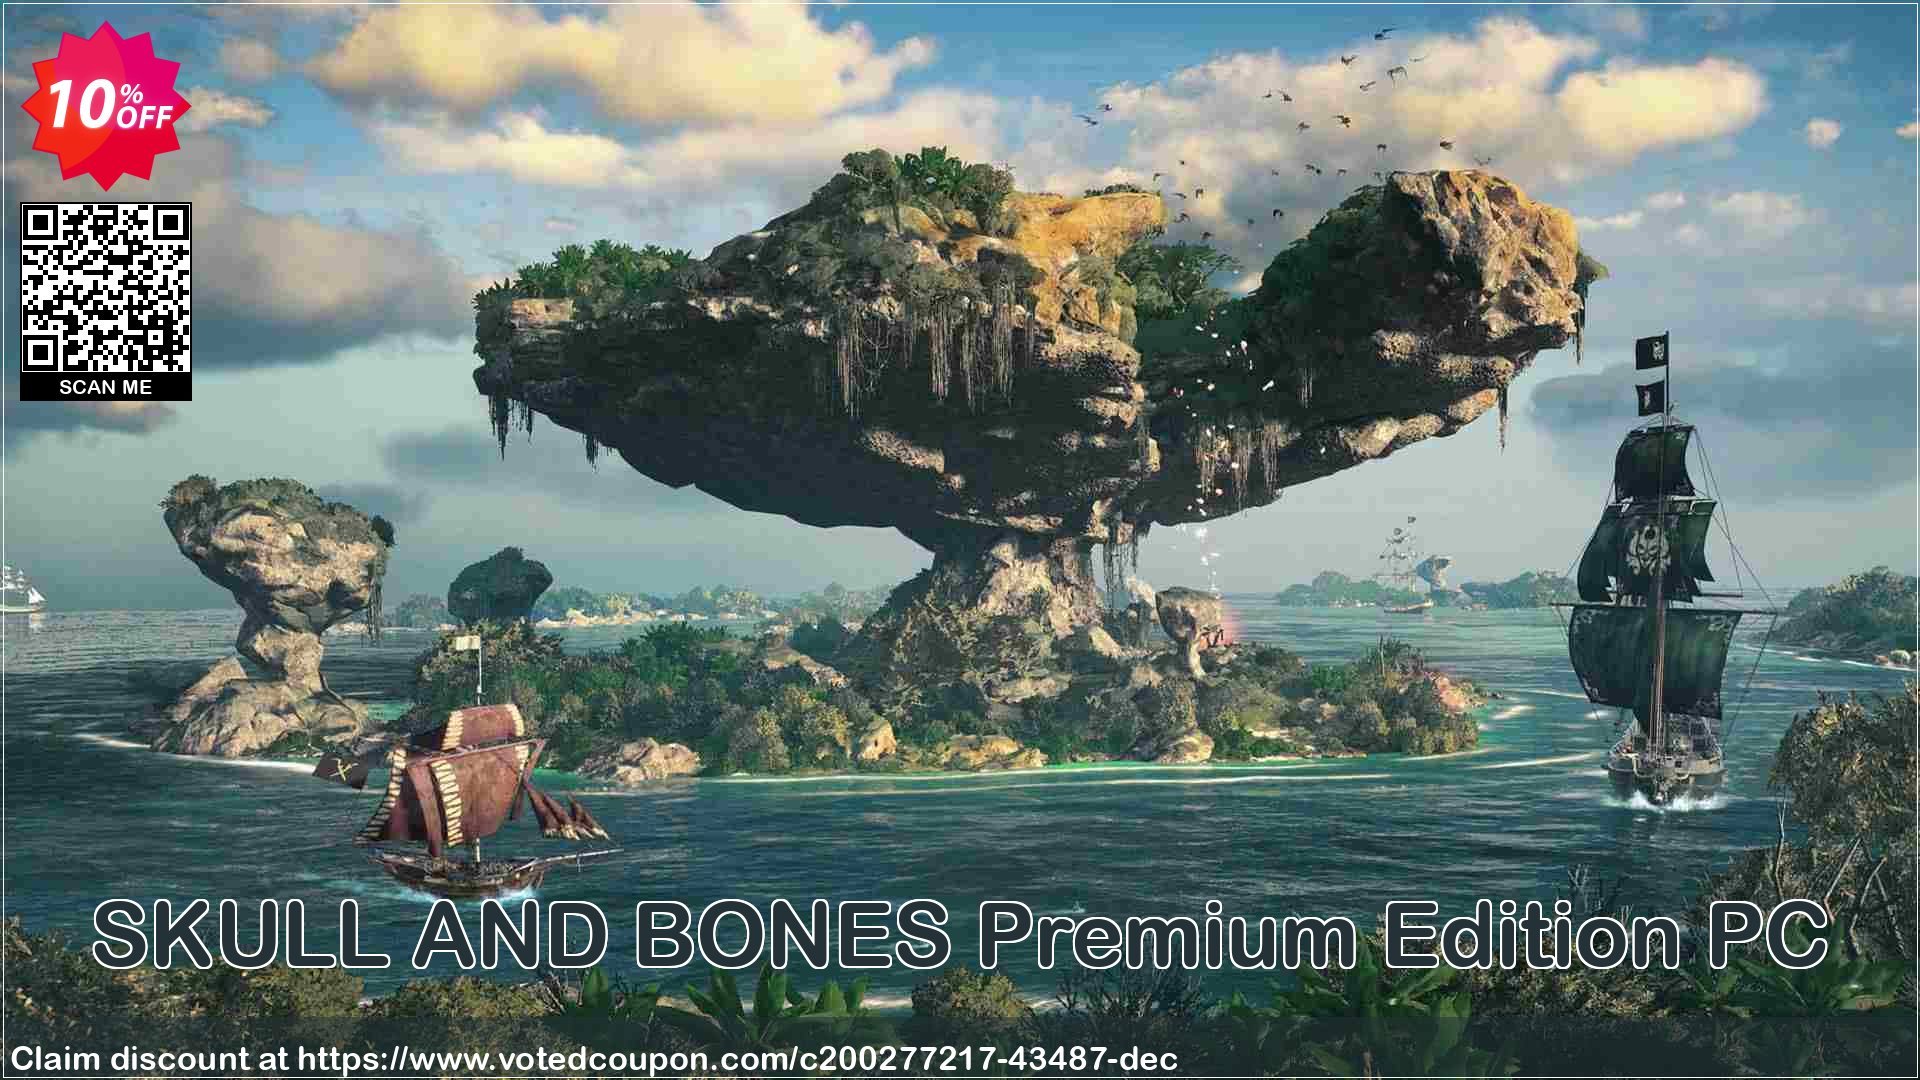 SKULL AND BONES Premium Edition PC Coupon Code May 2024, 10% OFF - VotedCoupon